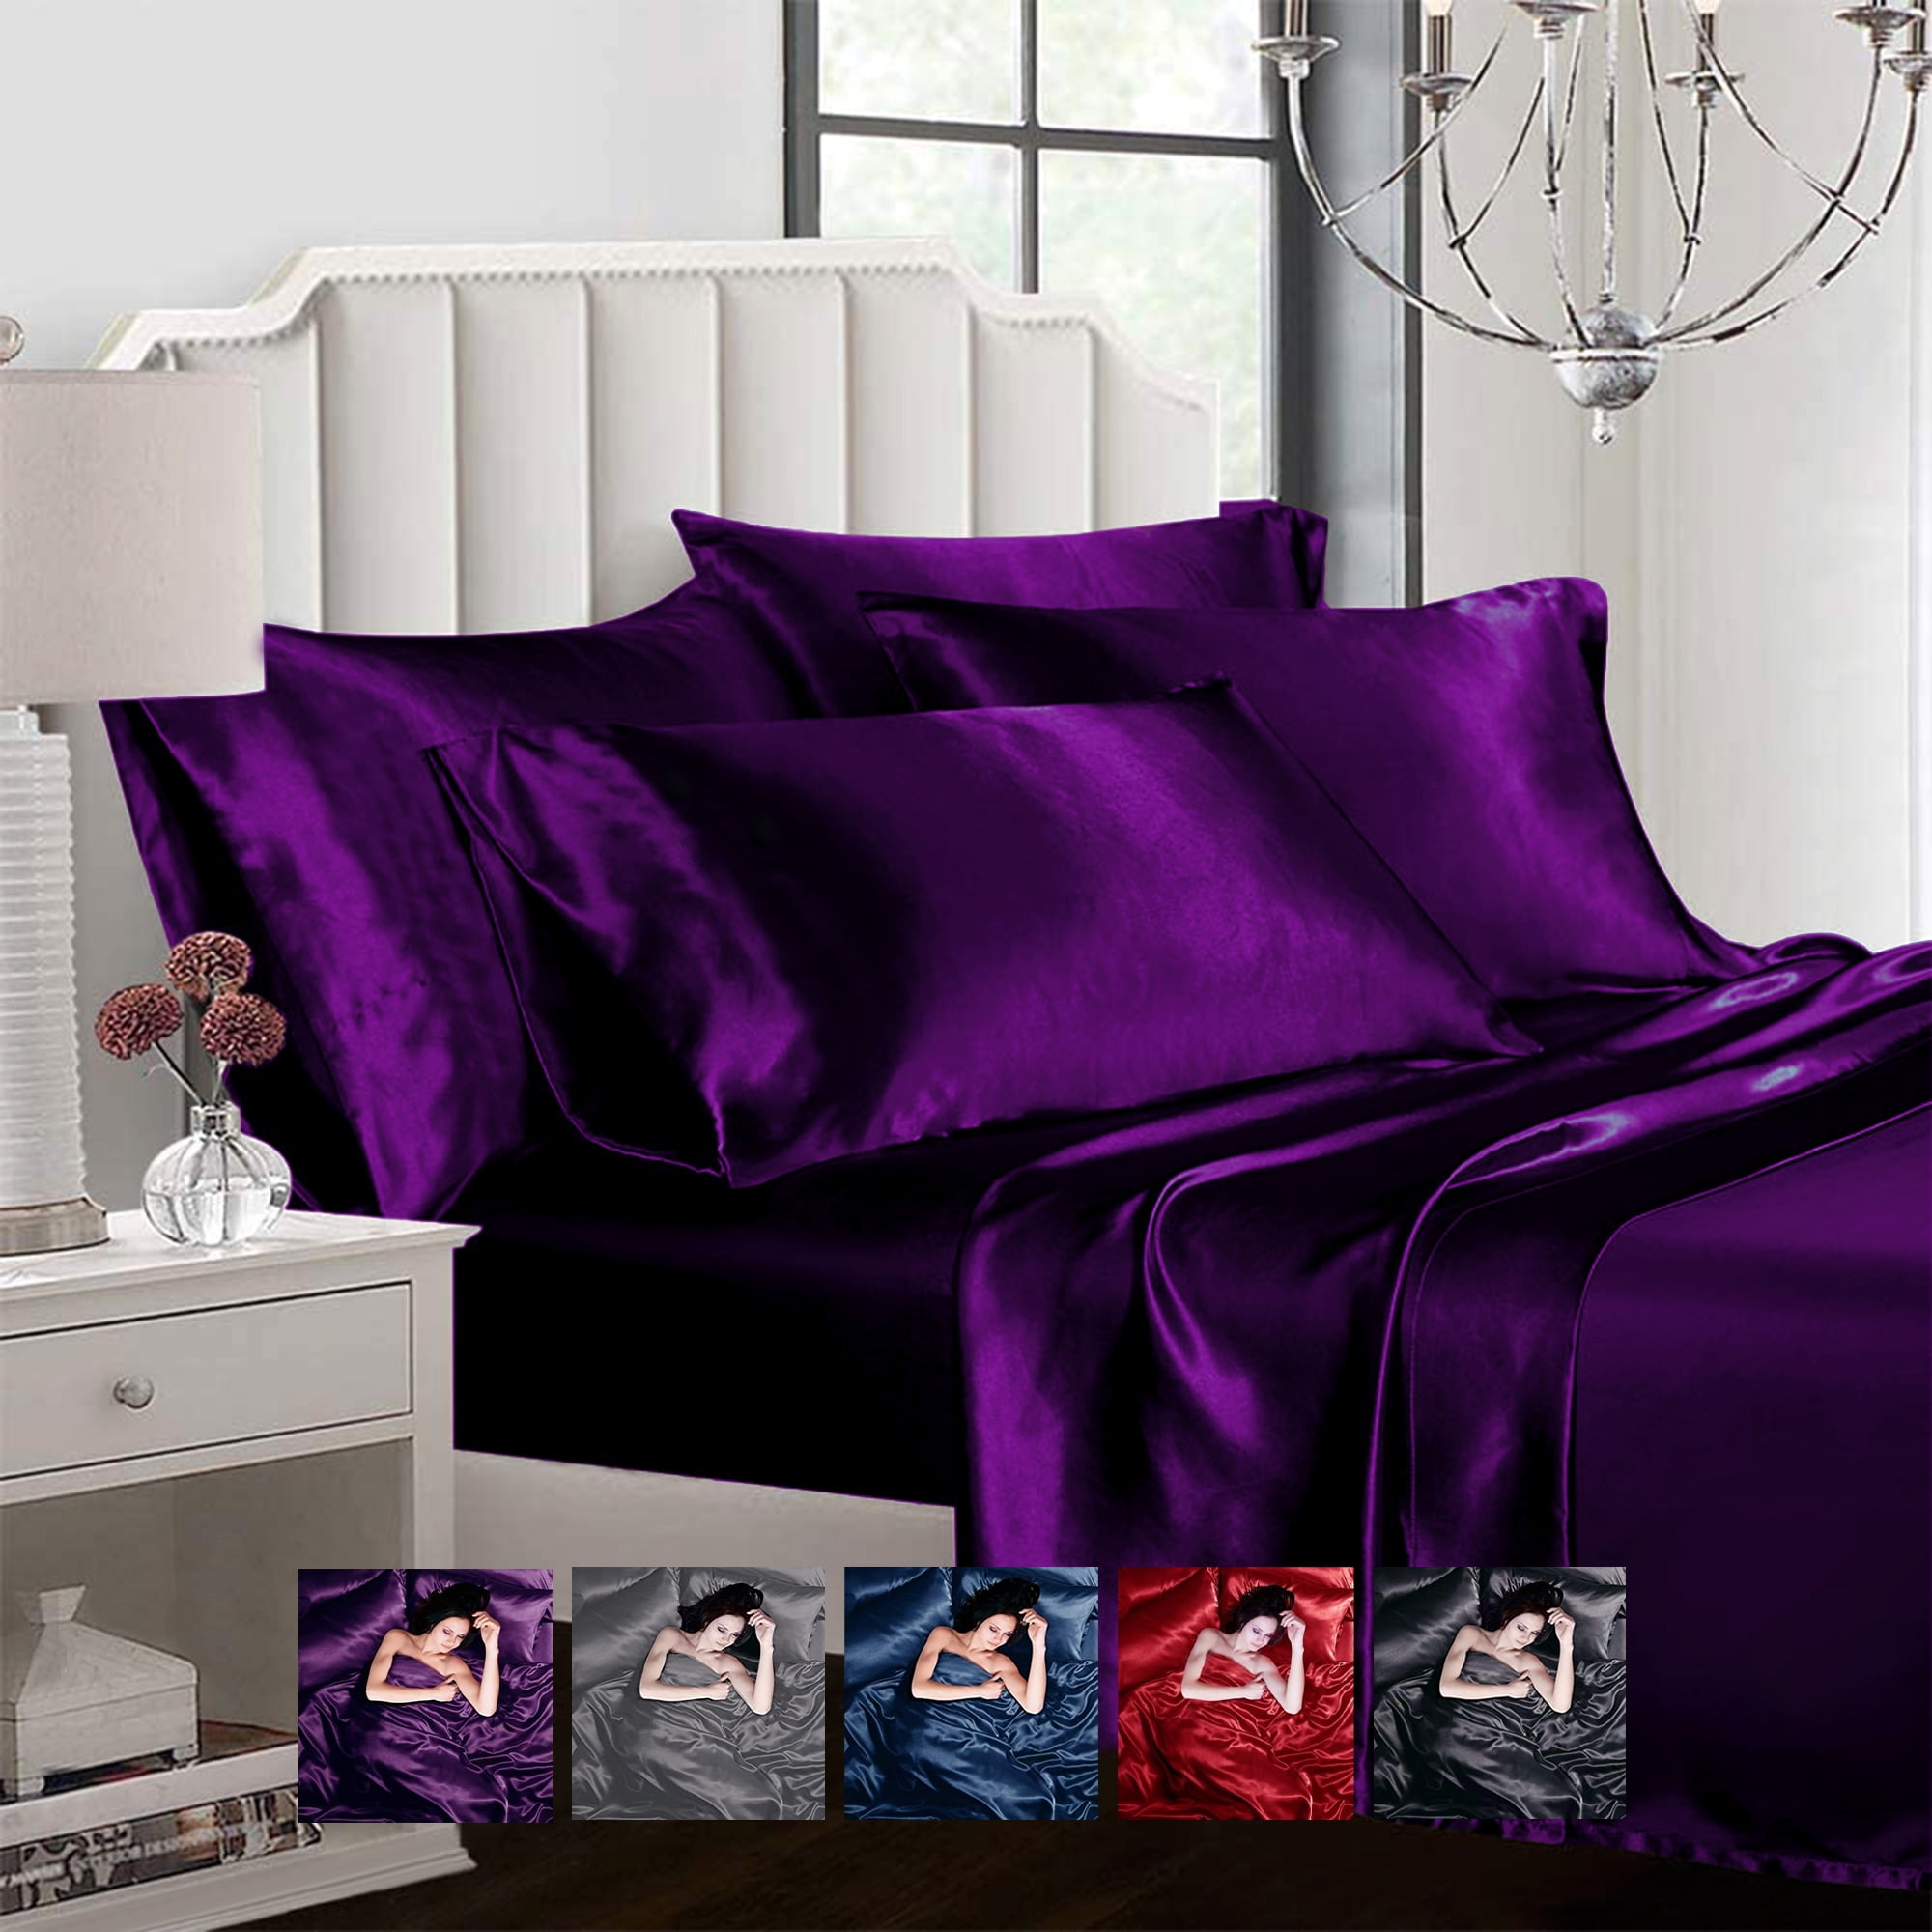 Satin 6 Pcs Silky Y Bedding Set, What Is Included In A Duvet Cover Set